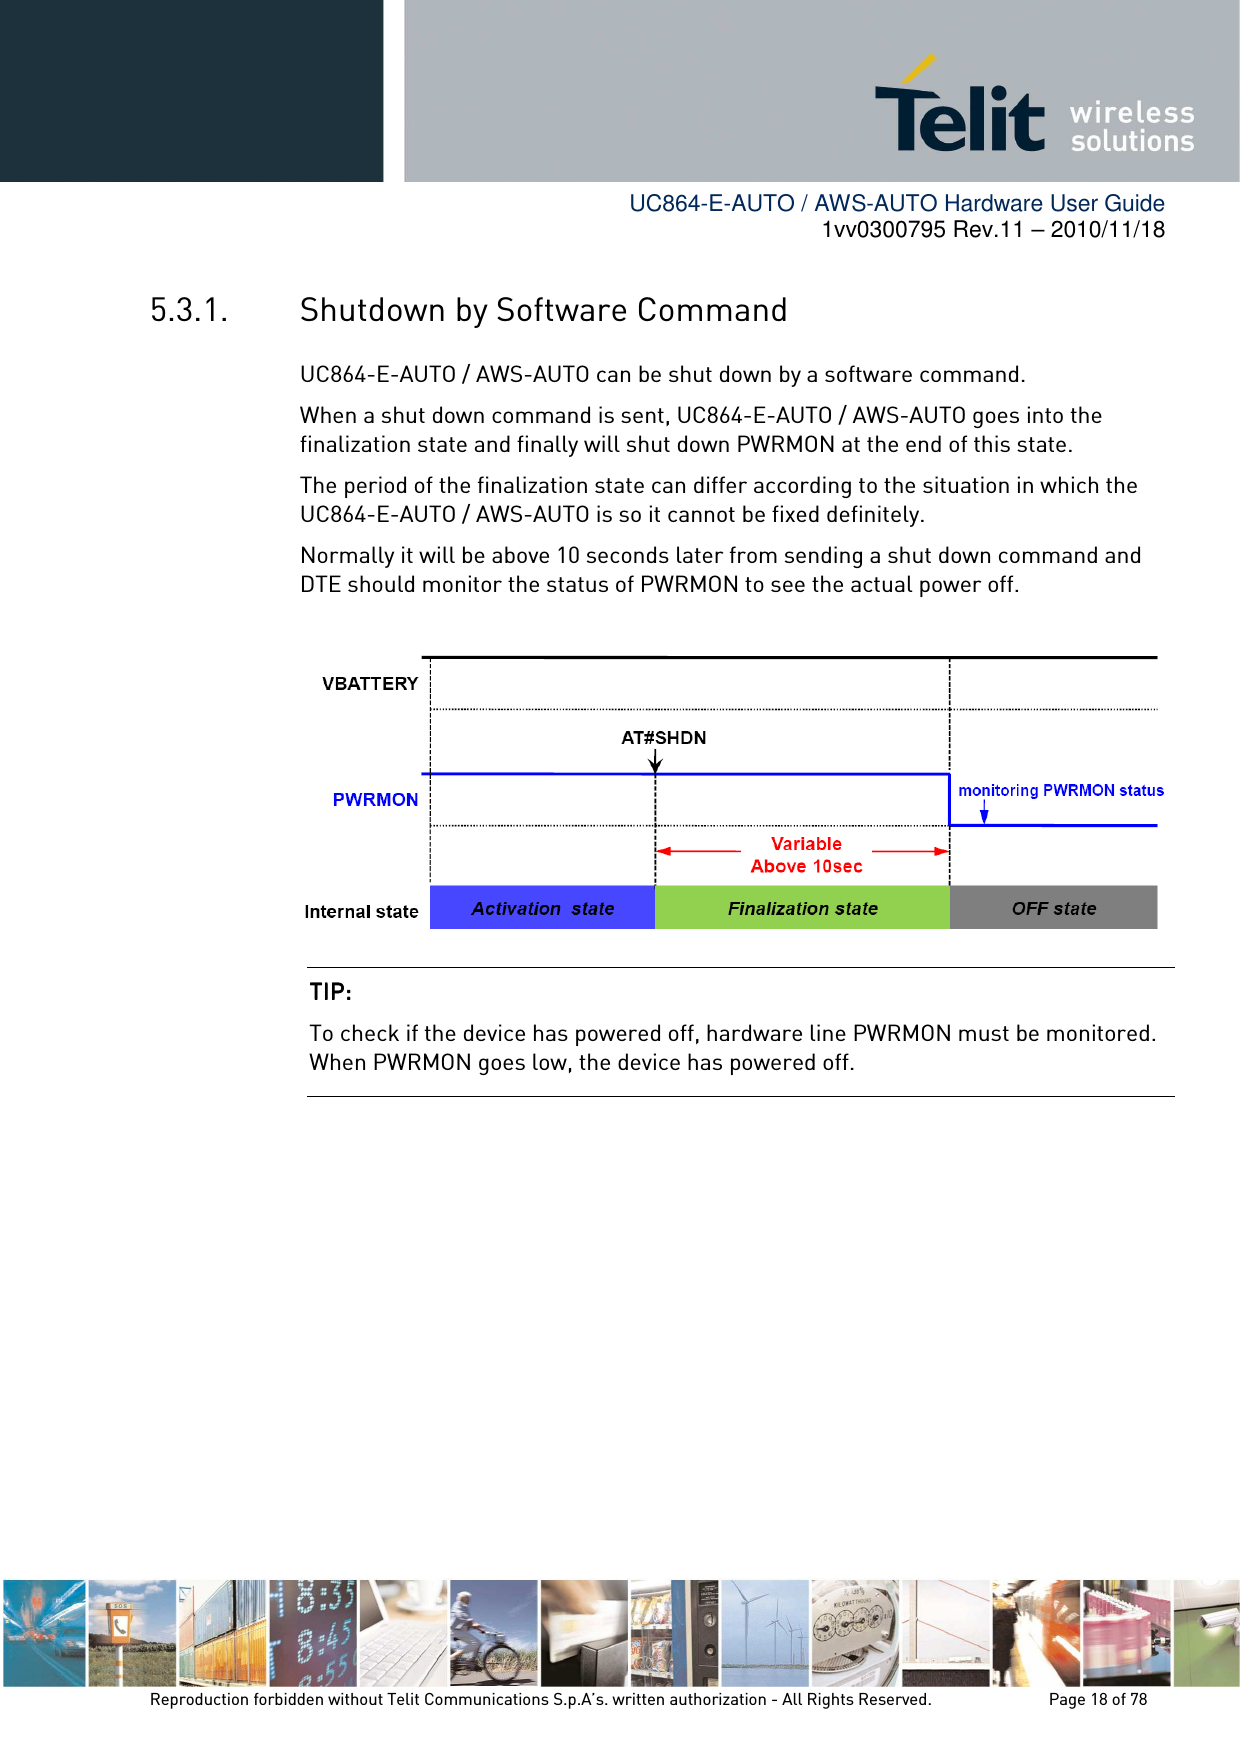        UC864-E-AUTO / AWS-AUTO Hardware User Guide 1vv0300795 Rev.11 – 2010/11/18     Reproduction forbidden without Telit Communications S.p.A’s. written authorization - All Rights Reserved.    Page 18 of 78  5.3.1. Shutdown by Software Command UC864-E-AUTO / AWS-AUTO can be shut down by a software command. When a shut down command is sent, UC864-E-AUTO / AWS-AUTO goes into the finalization state and finally will shut down PWRMON at the end of this state. The period of the finalization state can differ according to the situation in which the UC864-E-AUTO / AWS-AUTO is so it cannot be fixed definitely. Normally it will be above 10 seconds later from sending a shut down command and DTE should monitor the status of PWRMON to see the actual power off.   TIP: TIP: TIP: TIP:     To check if the device has powered off, hardware line PWRMON must be monitored. When PWRMON goes low, the device has powered off. 